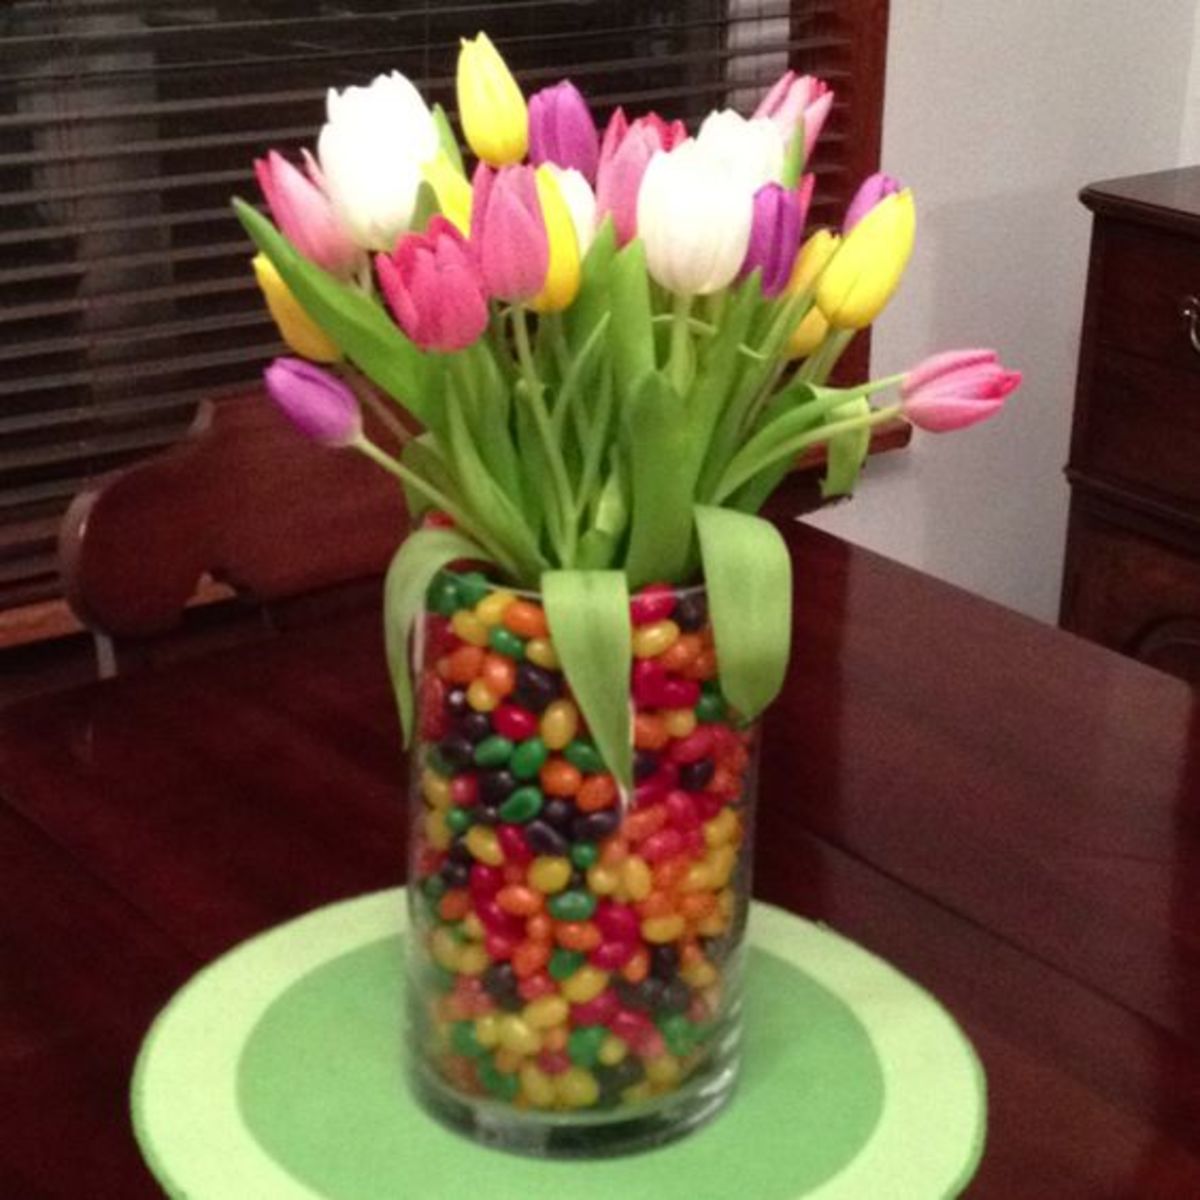 Fill a mason jar with jellybeans and top it with tulips to get this colorful centerpiece for Easter!